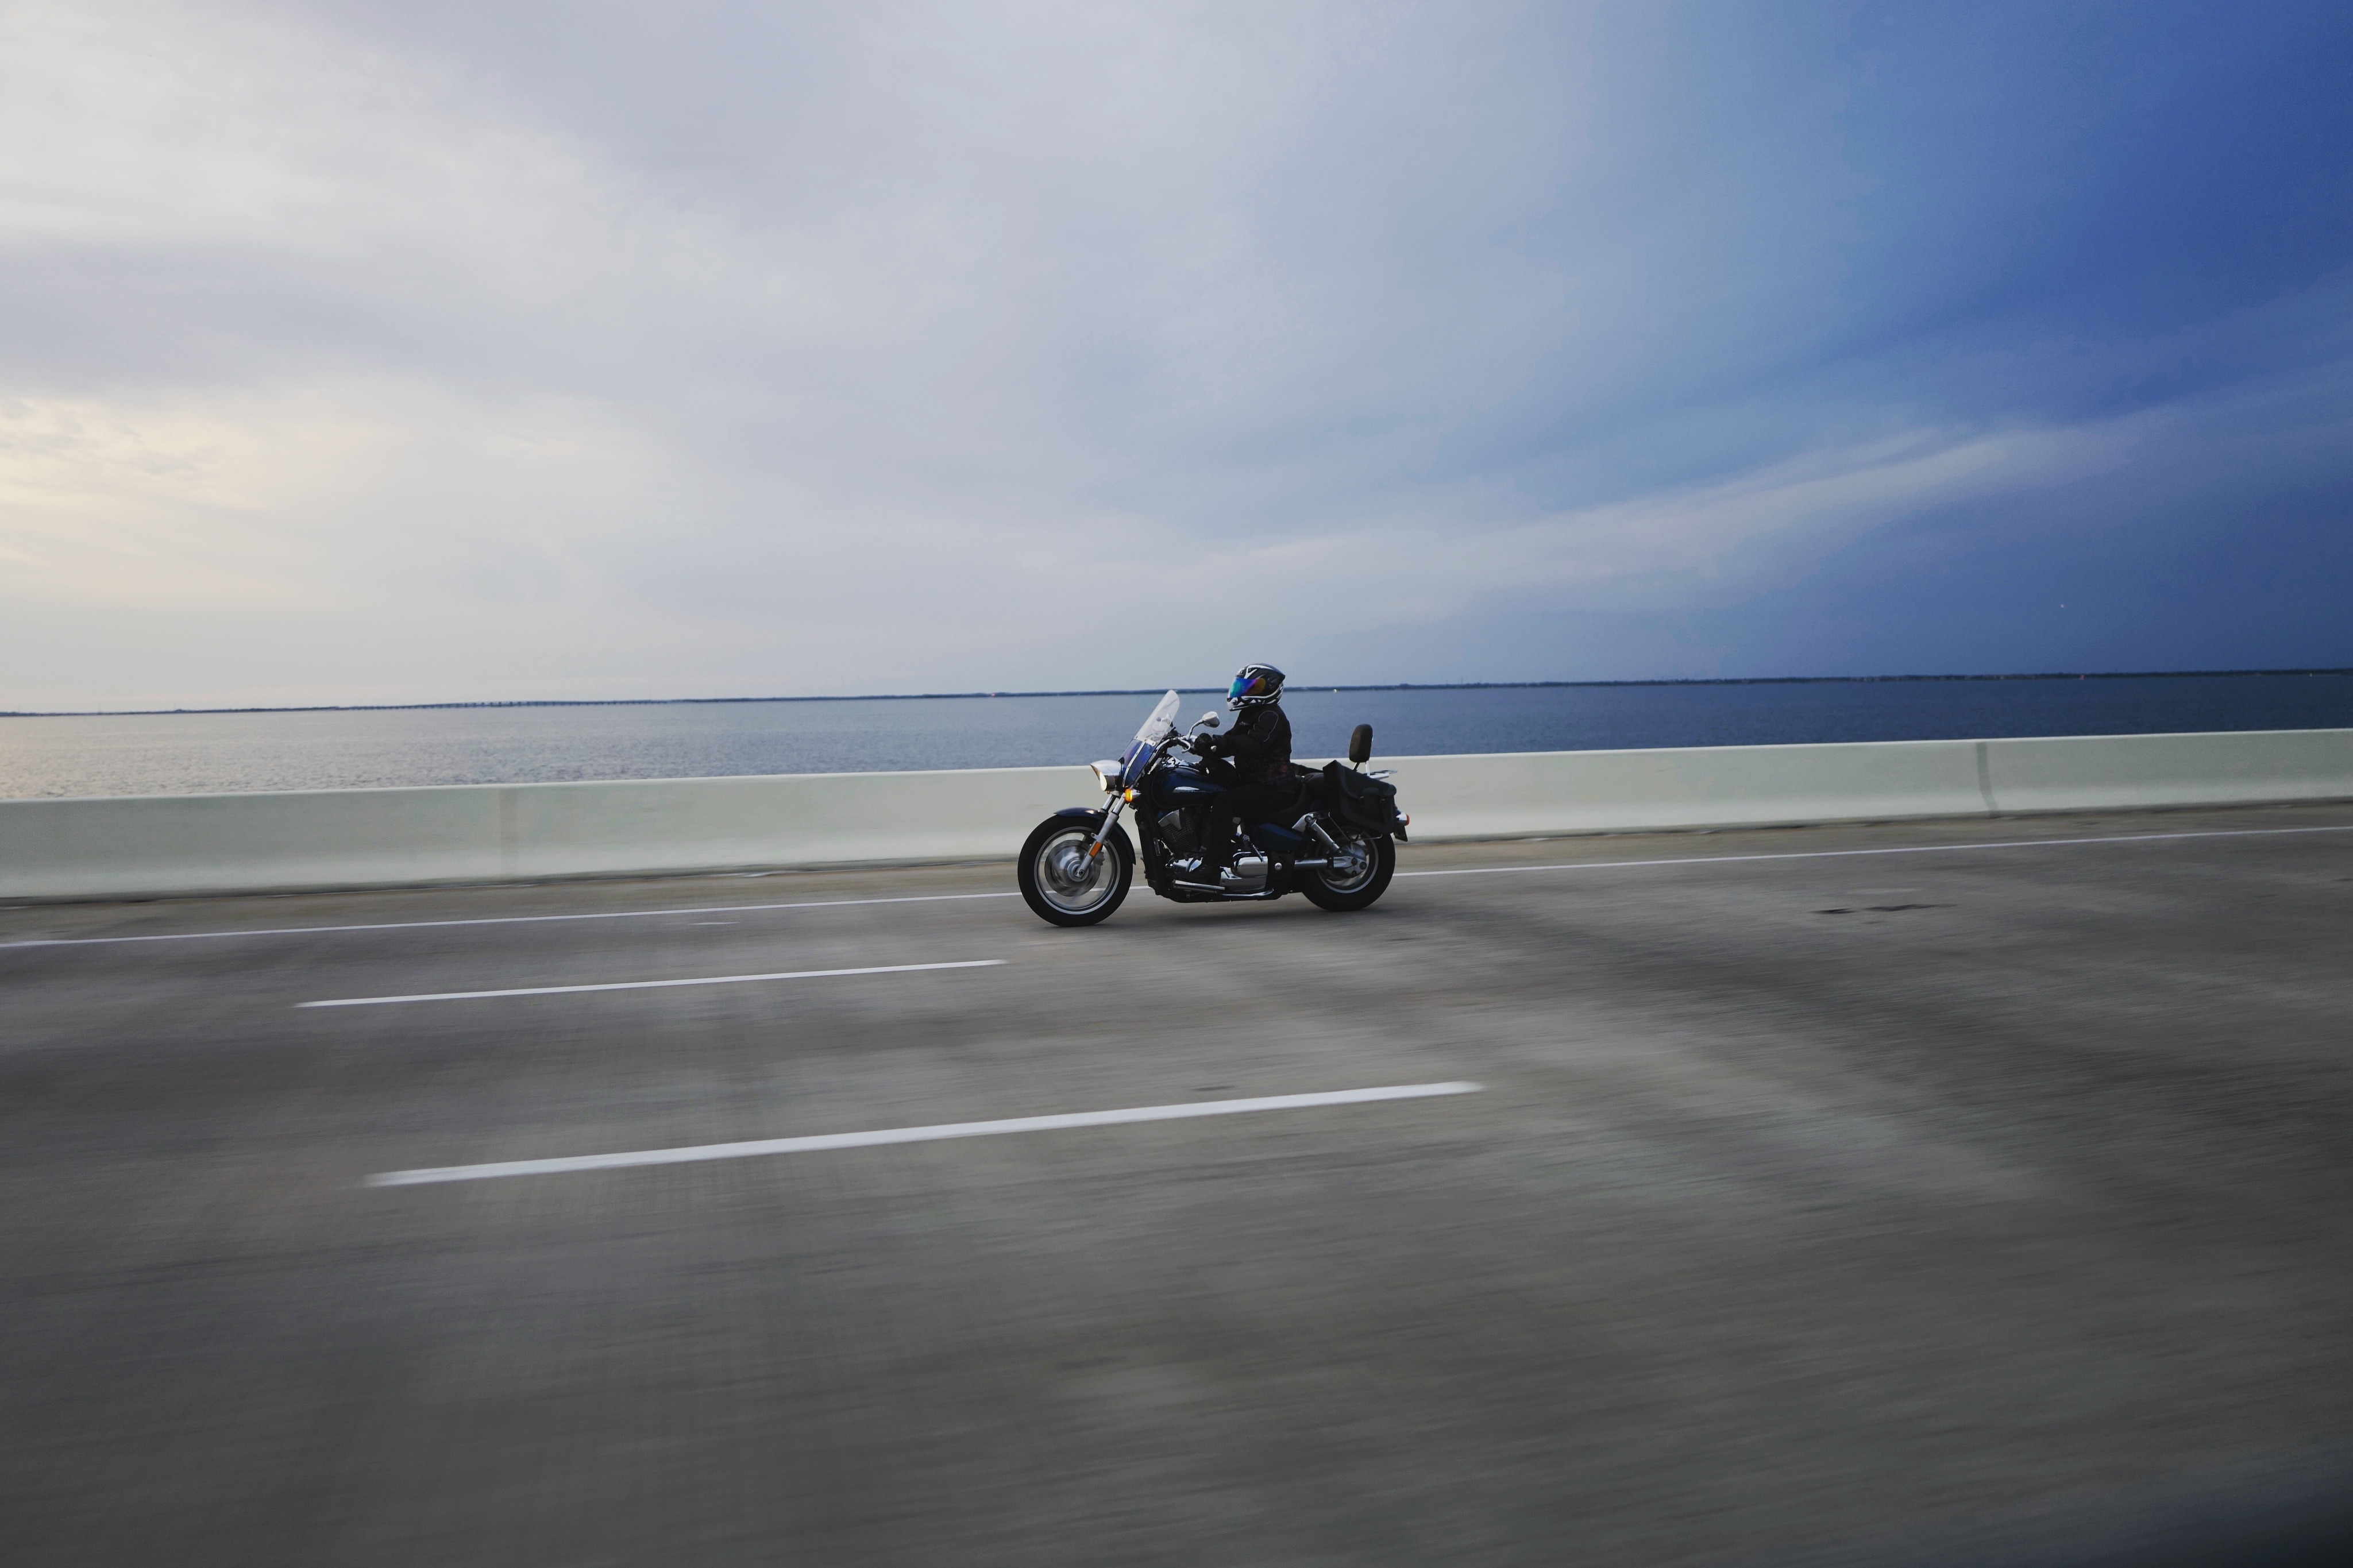 selective focus photography of man riding motorcycle near body of water under blue skies